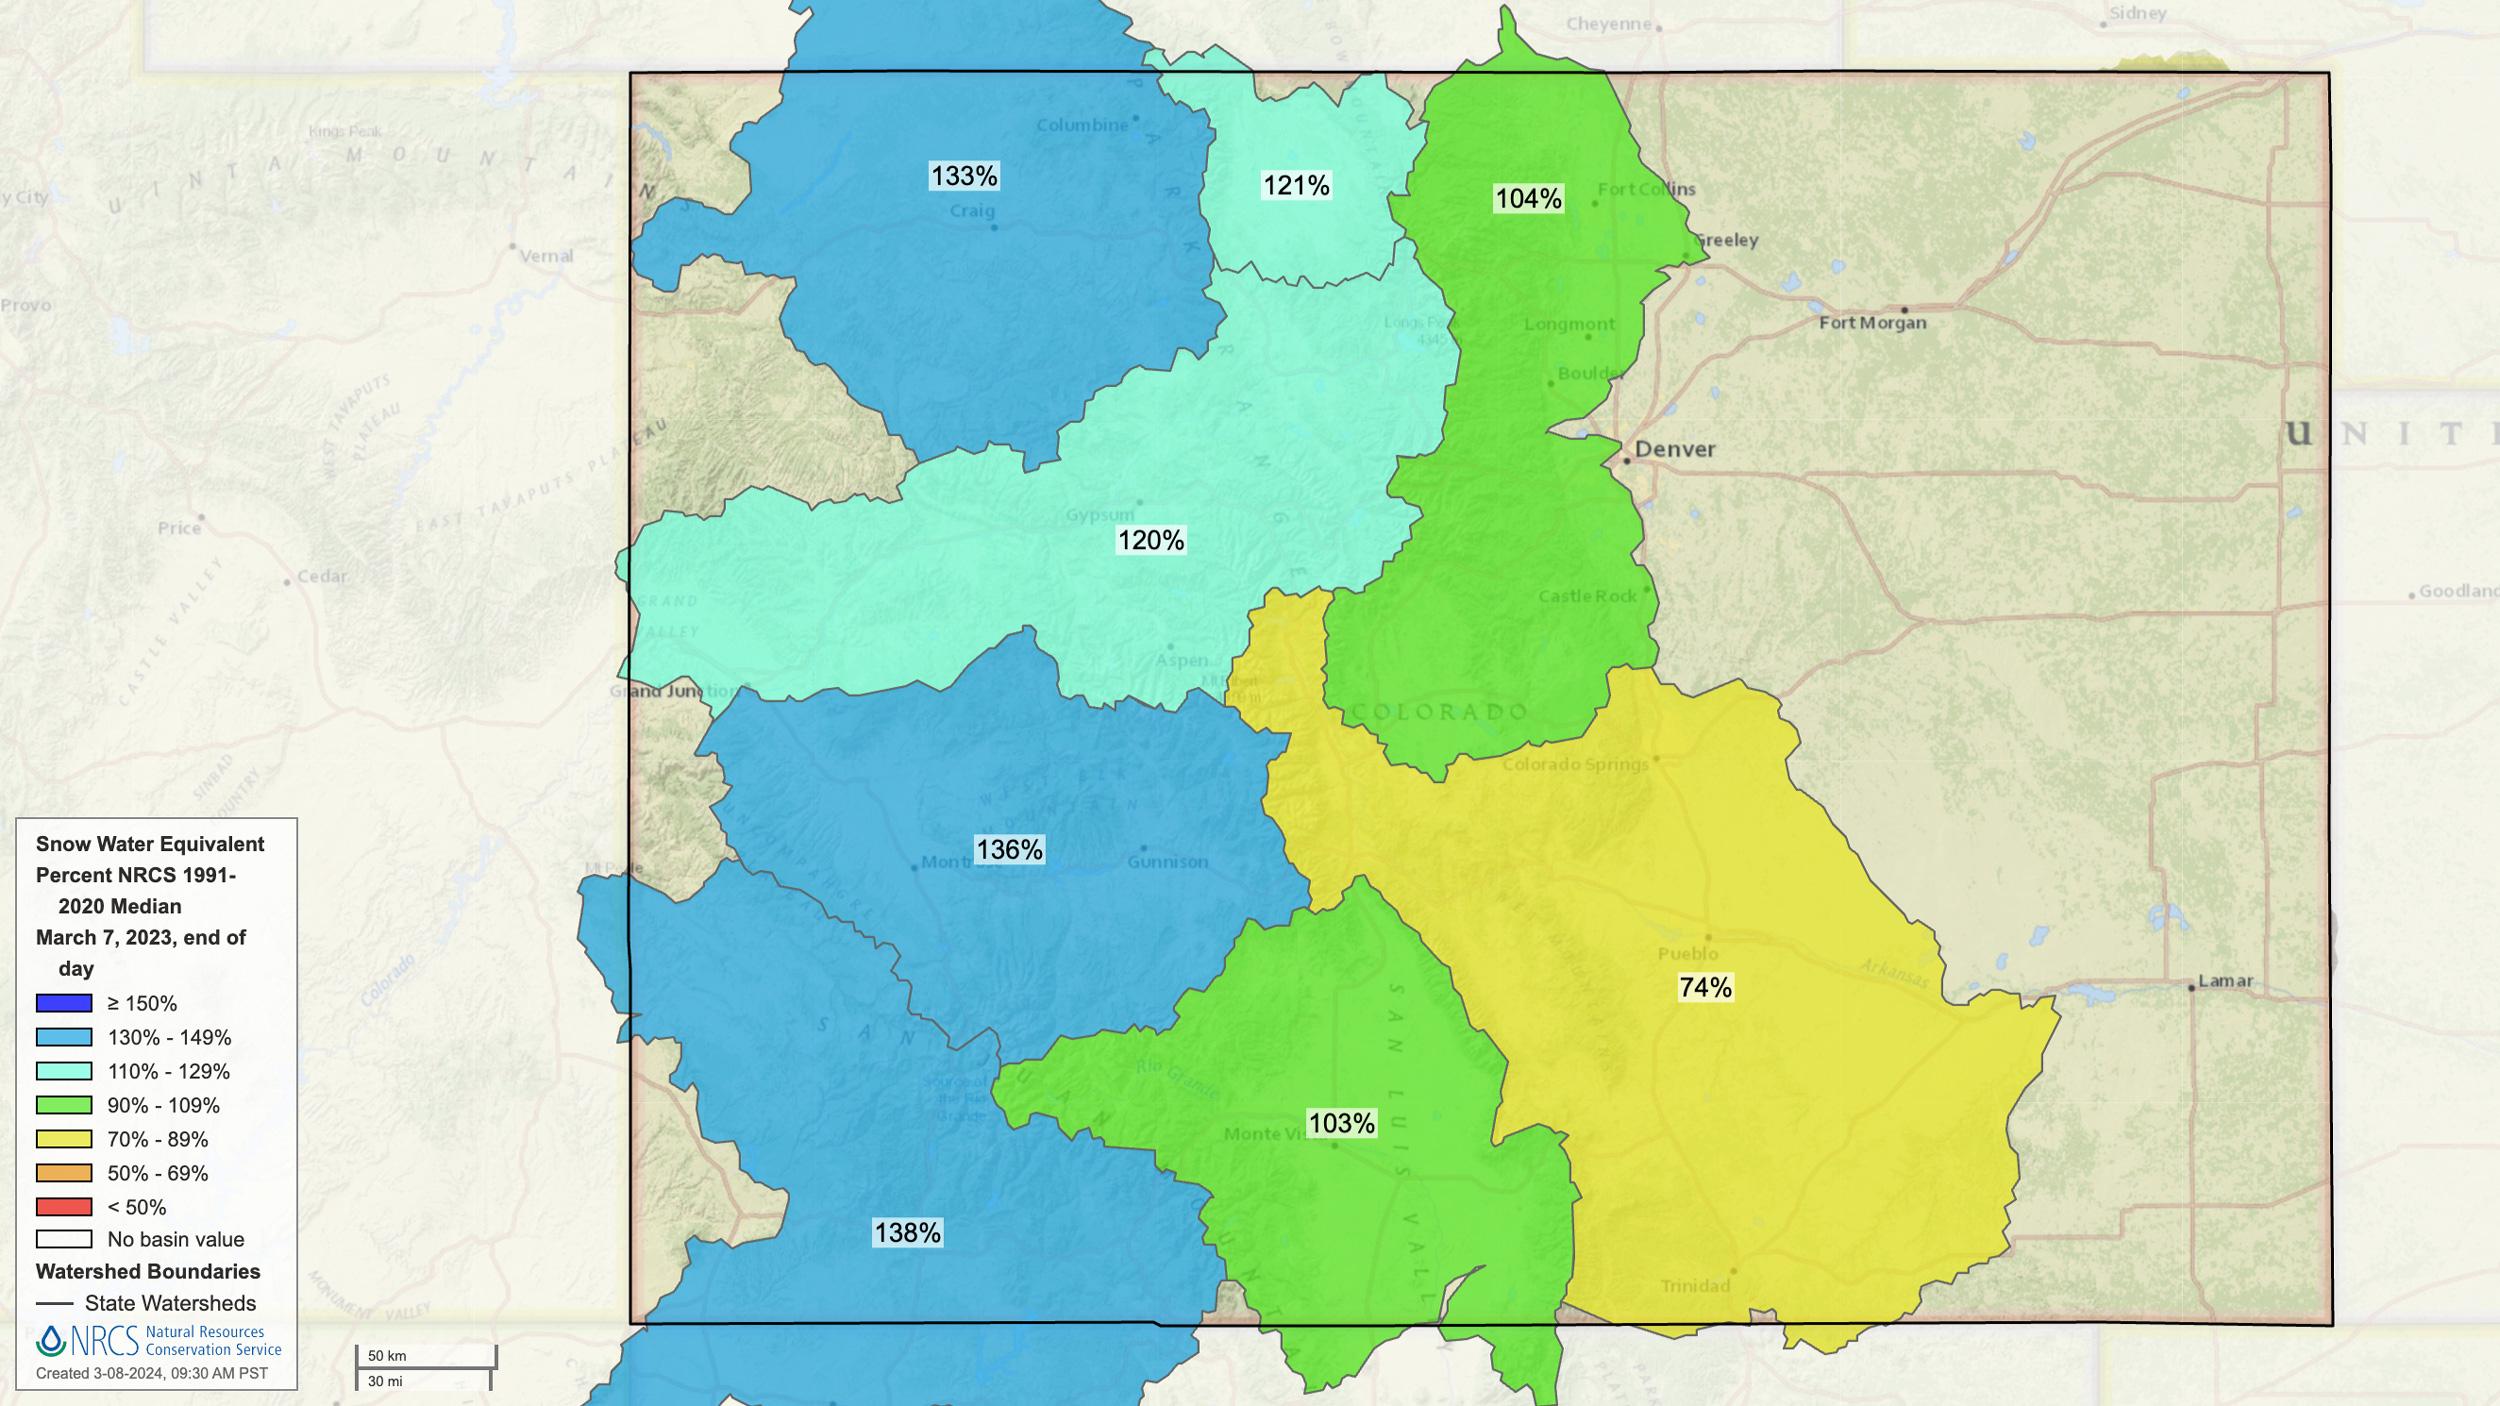 Colorado early March 2023 snow water equivalent map